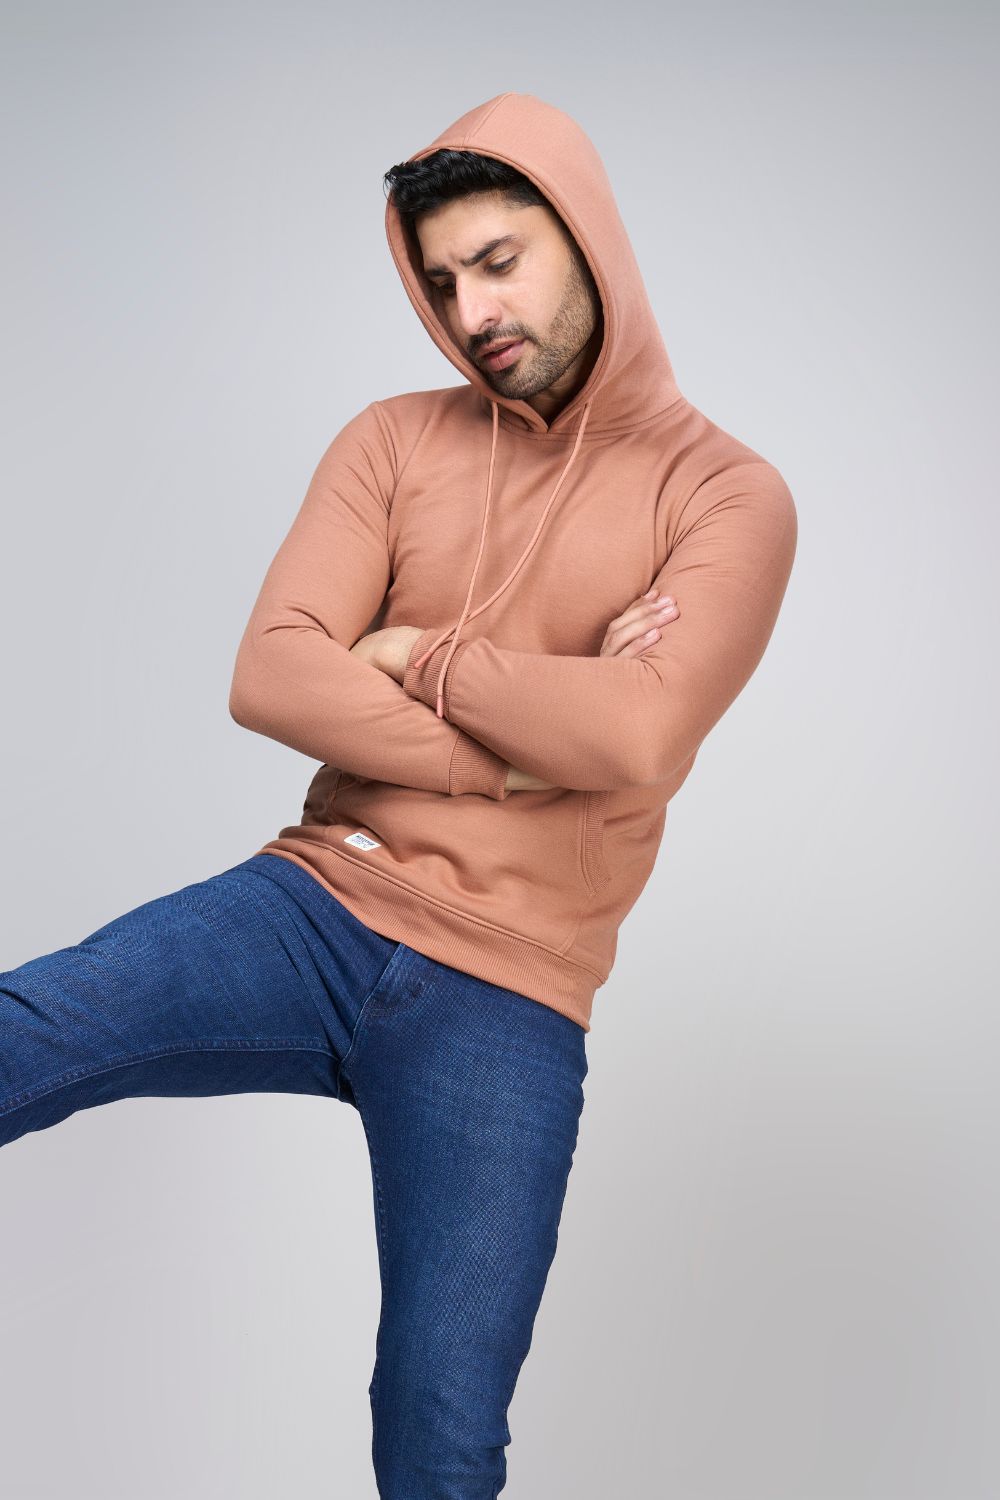 A model wearing Leather Brown colored, hoodie for men with full sleeves and relaxed fit.